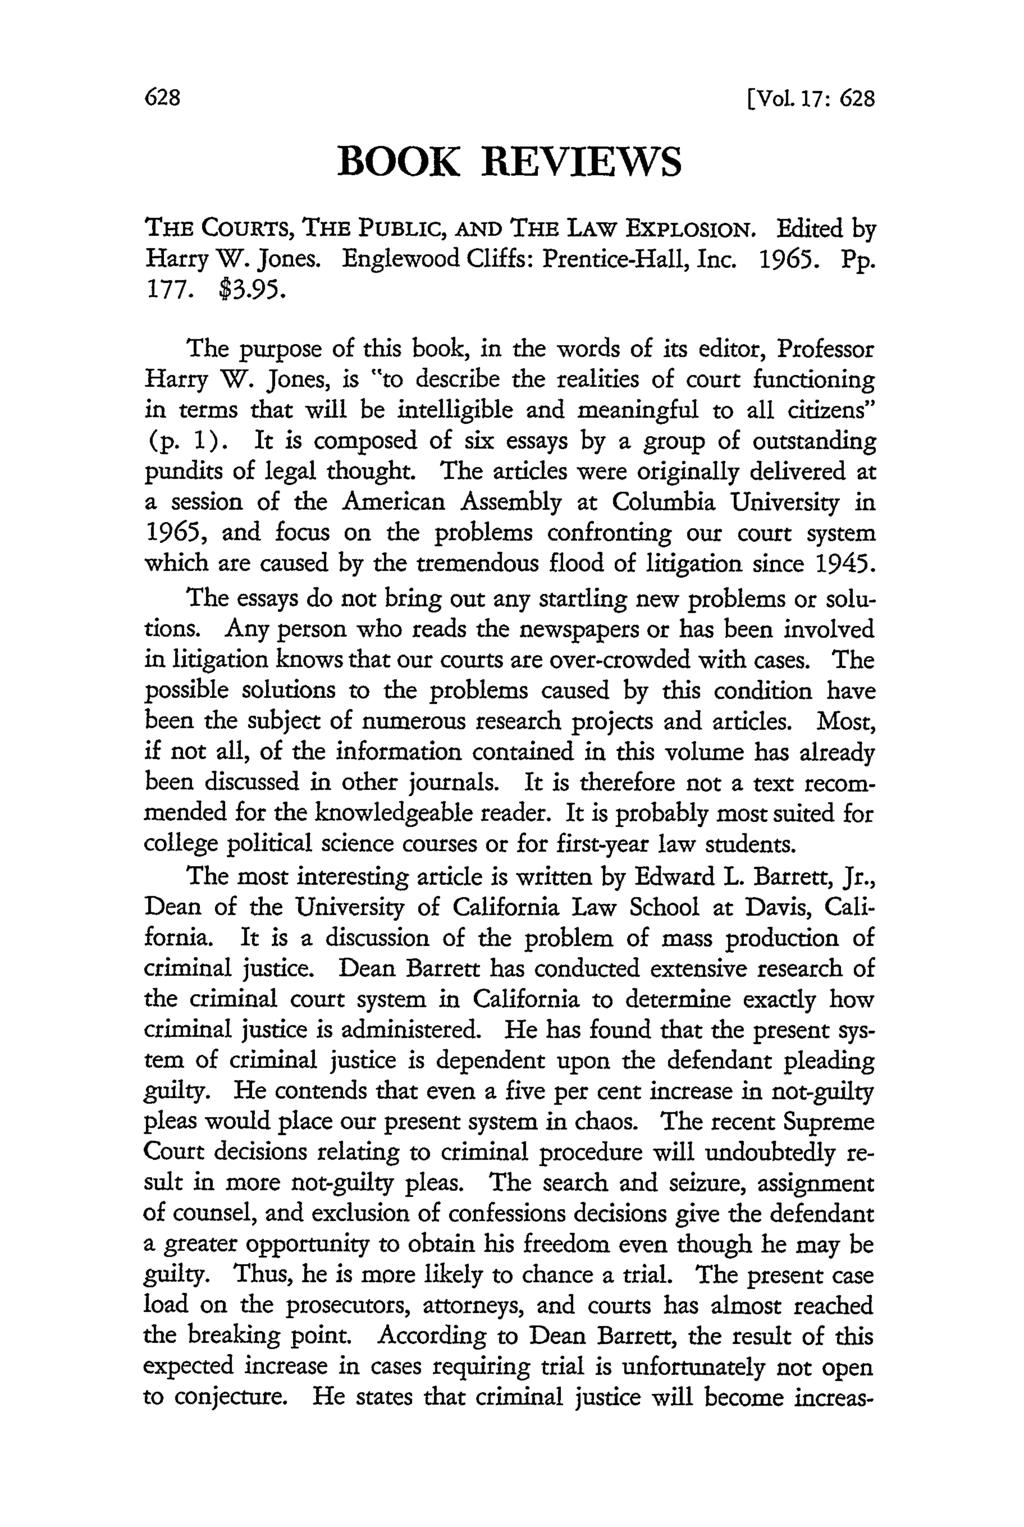 BOOK REVIEWS [Vol. 17: 628 THE COURTS, THE PUBLIC, AND THE LAW ExPLOSION. Edited by Harry W. Jones. Englewood Cliffs: Prentice-Hall, Inc. 1965. Pp. 177. $3.95.